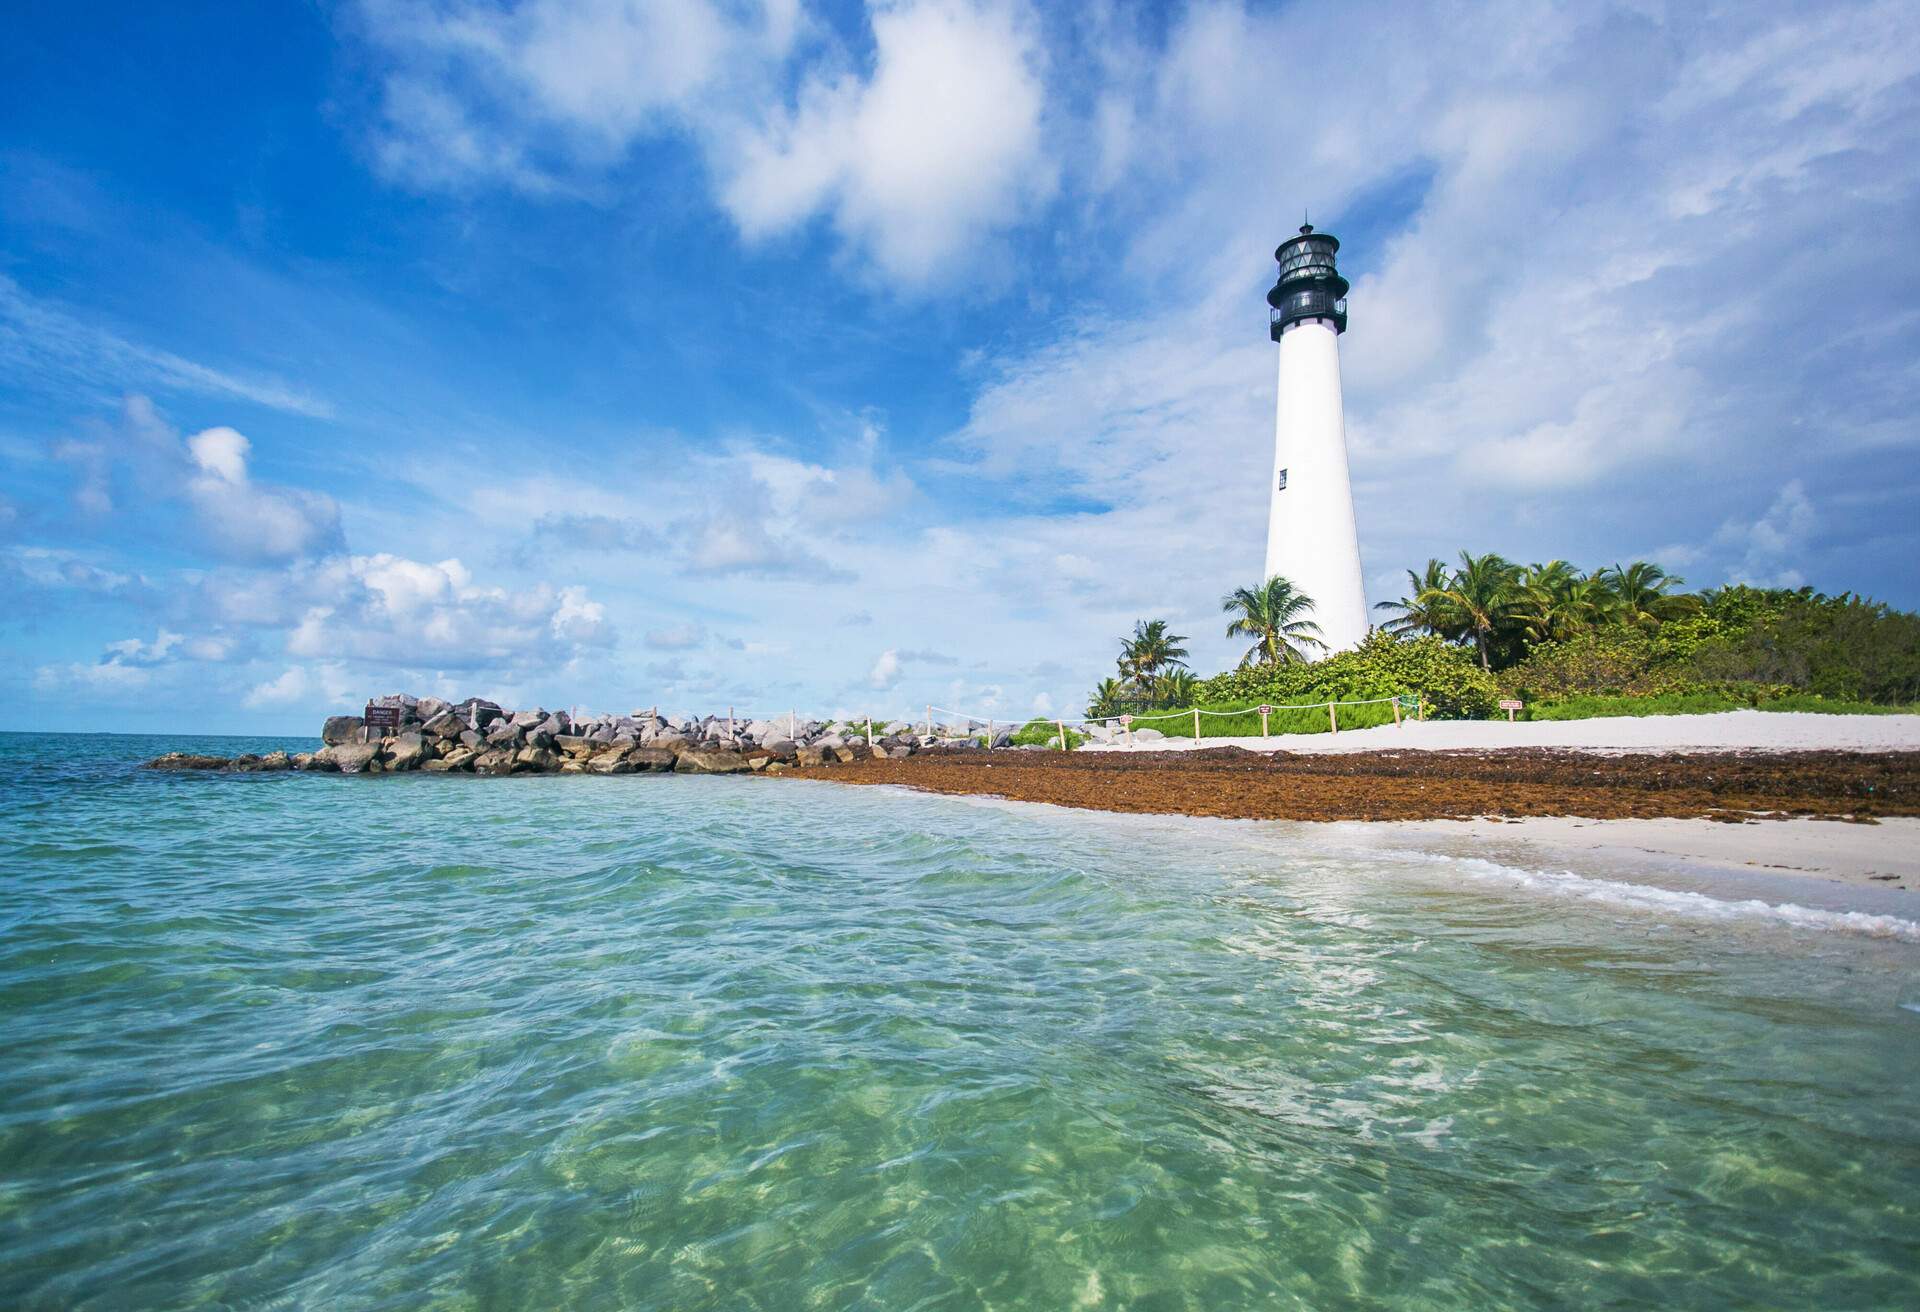 The lighthouse overlooking the waters of Miami in Key Biscayne, FL